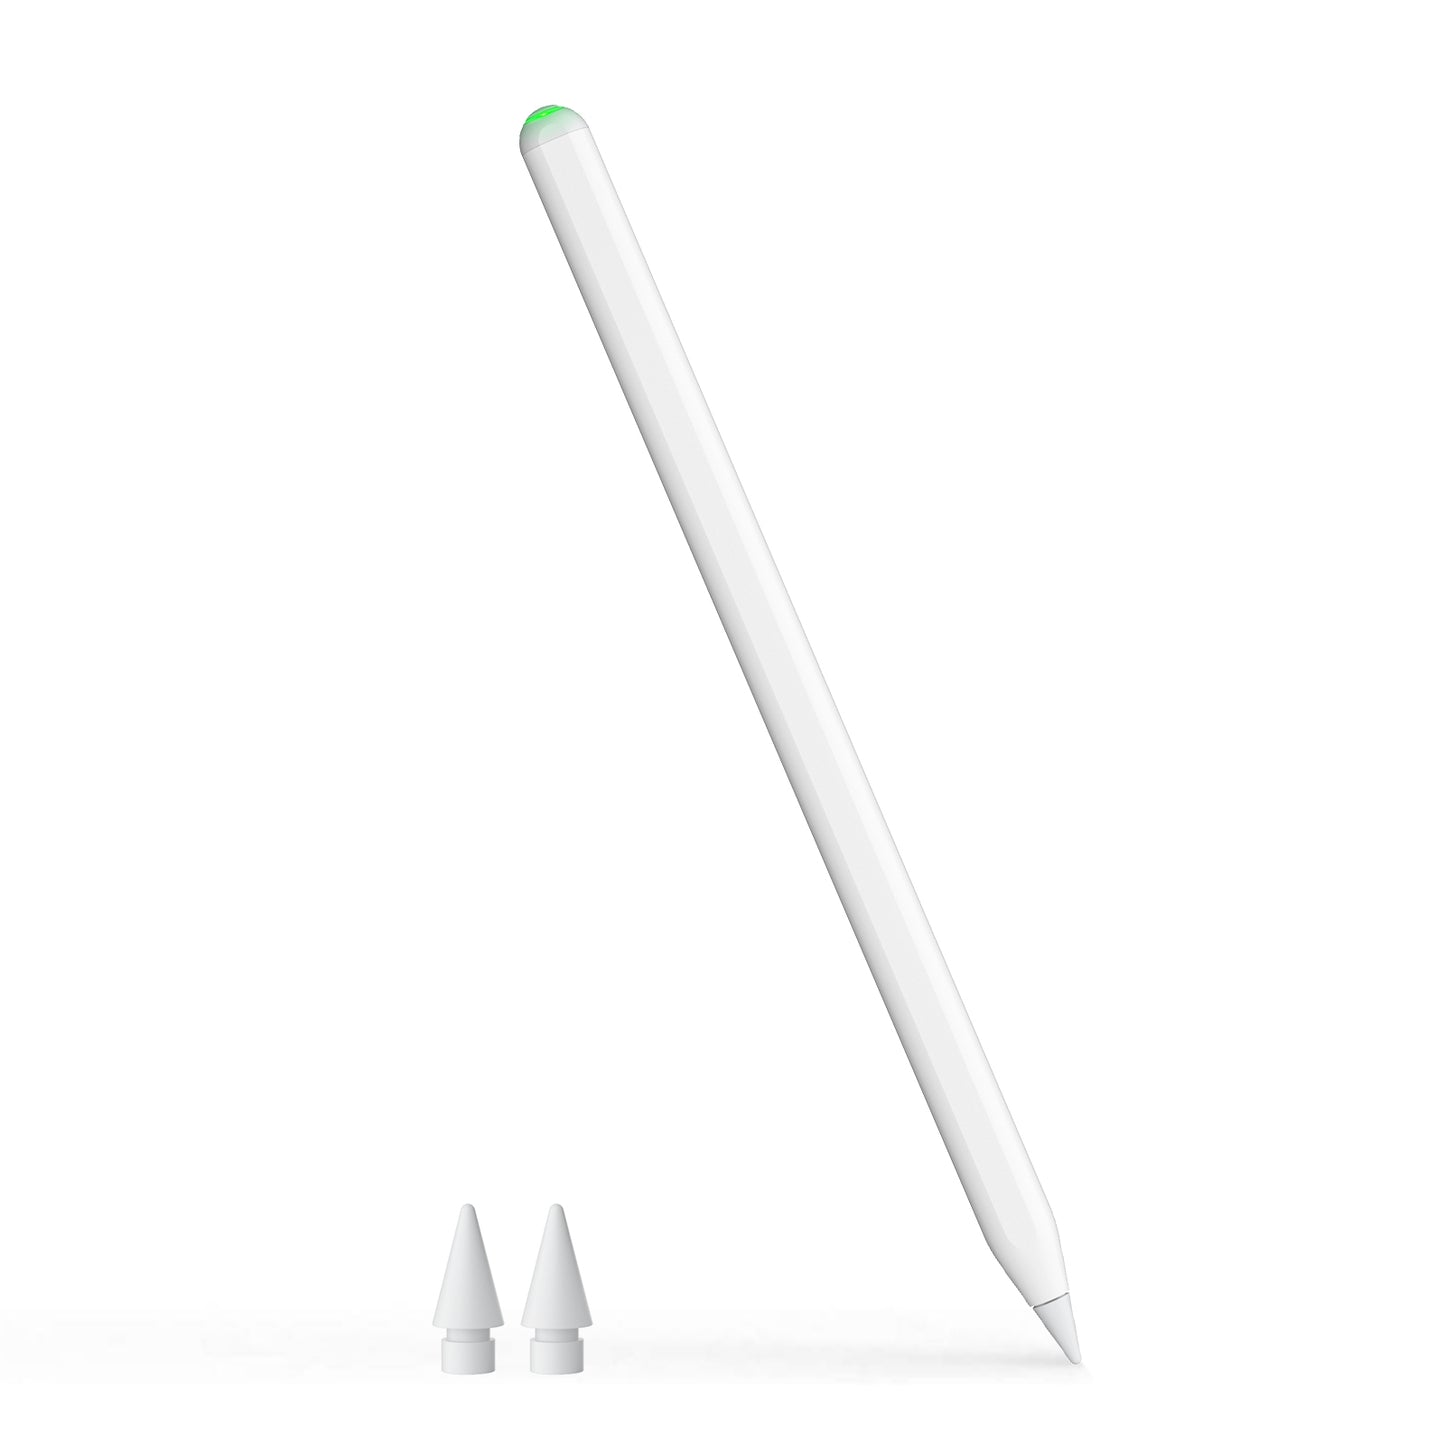 KINGONE Wireless Charging Pencil (2nd Generation) for iPad with Magnetic and Tilt Sensitive, Palm Rejection, Compatible with Apple iPad Pro 11 inch 1/2/3/4, iPad Pro 12.9 Inch 3/4/5/6, iPad Air 4/5, mini6